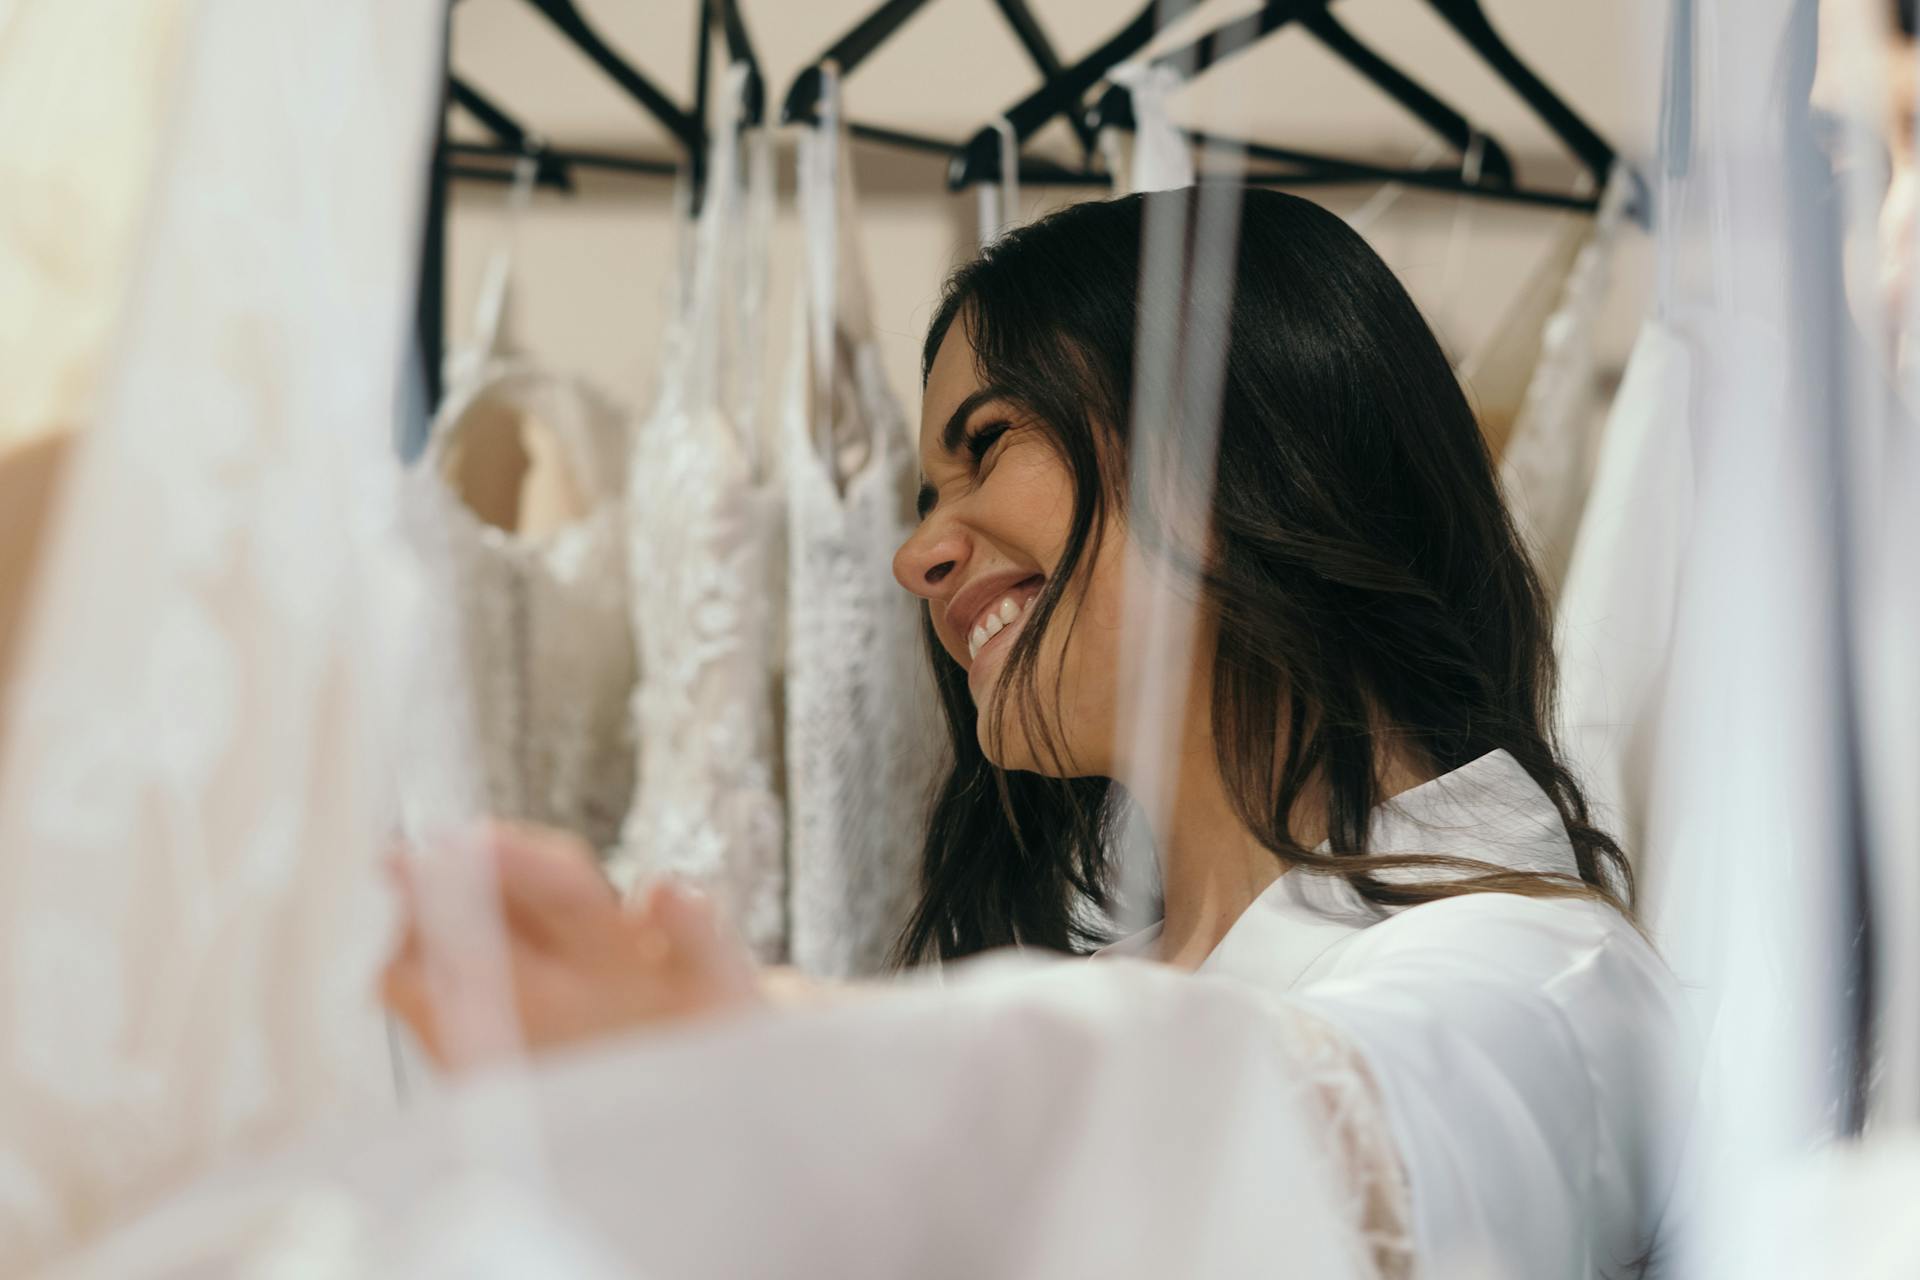 A bride with wedding dresses | Source: Pexels